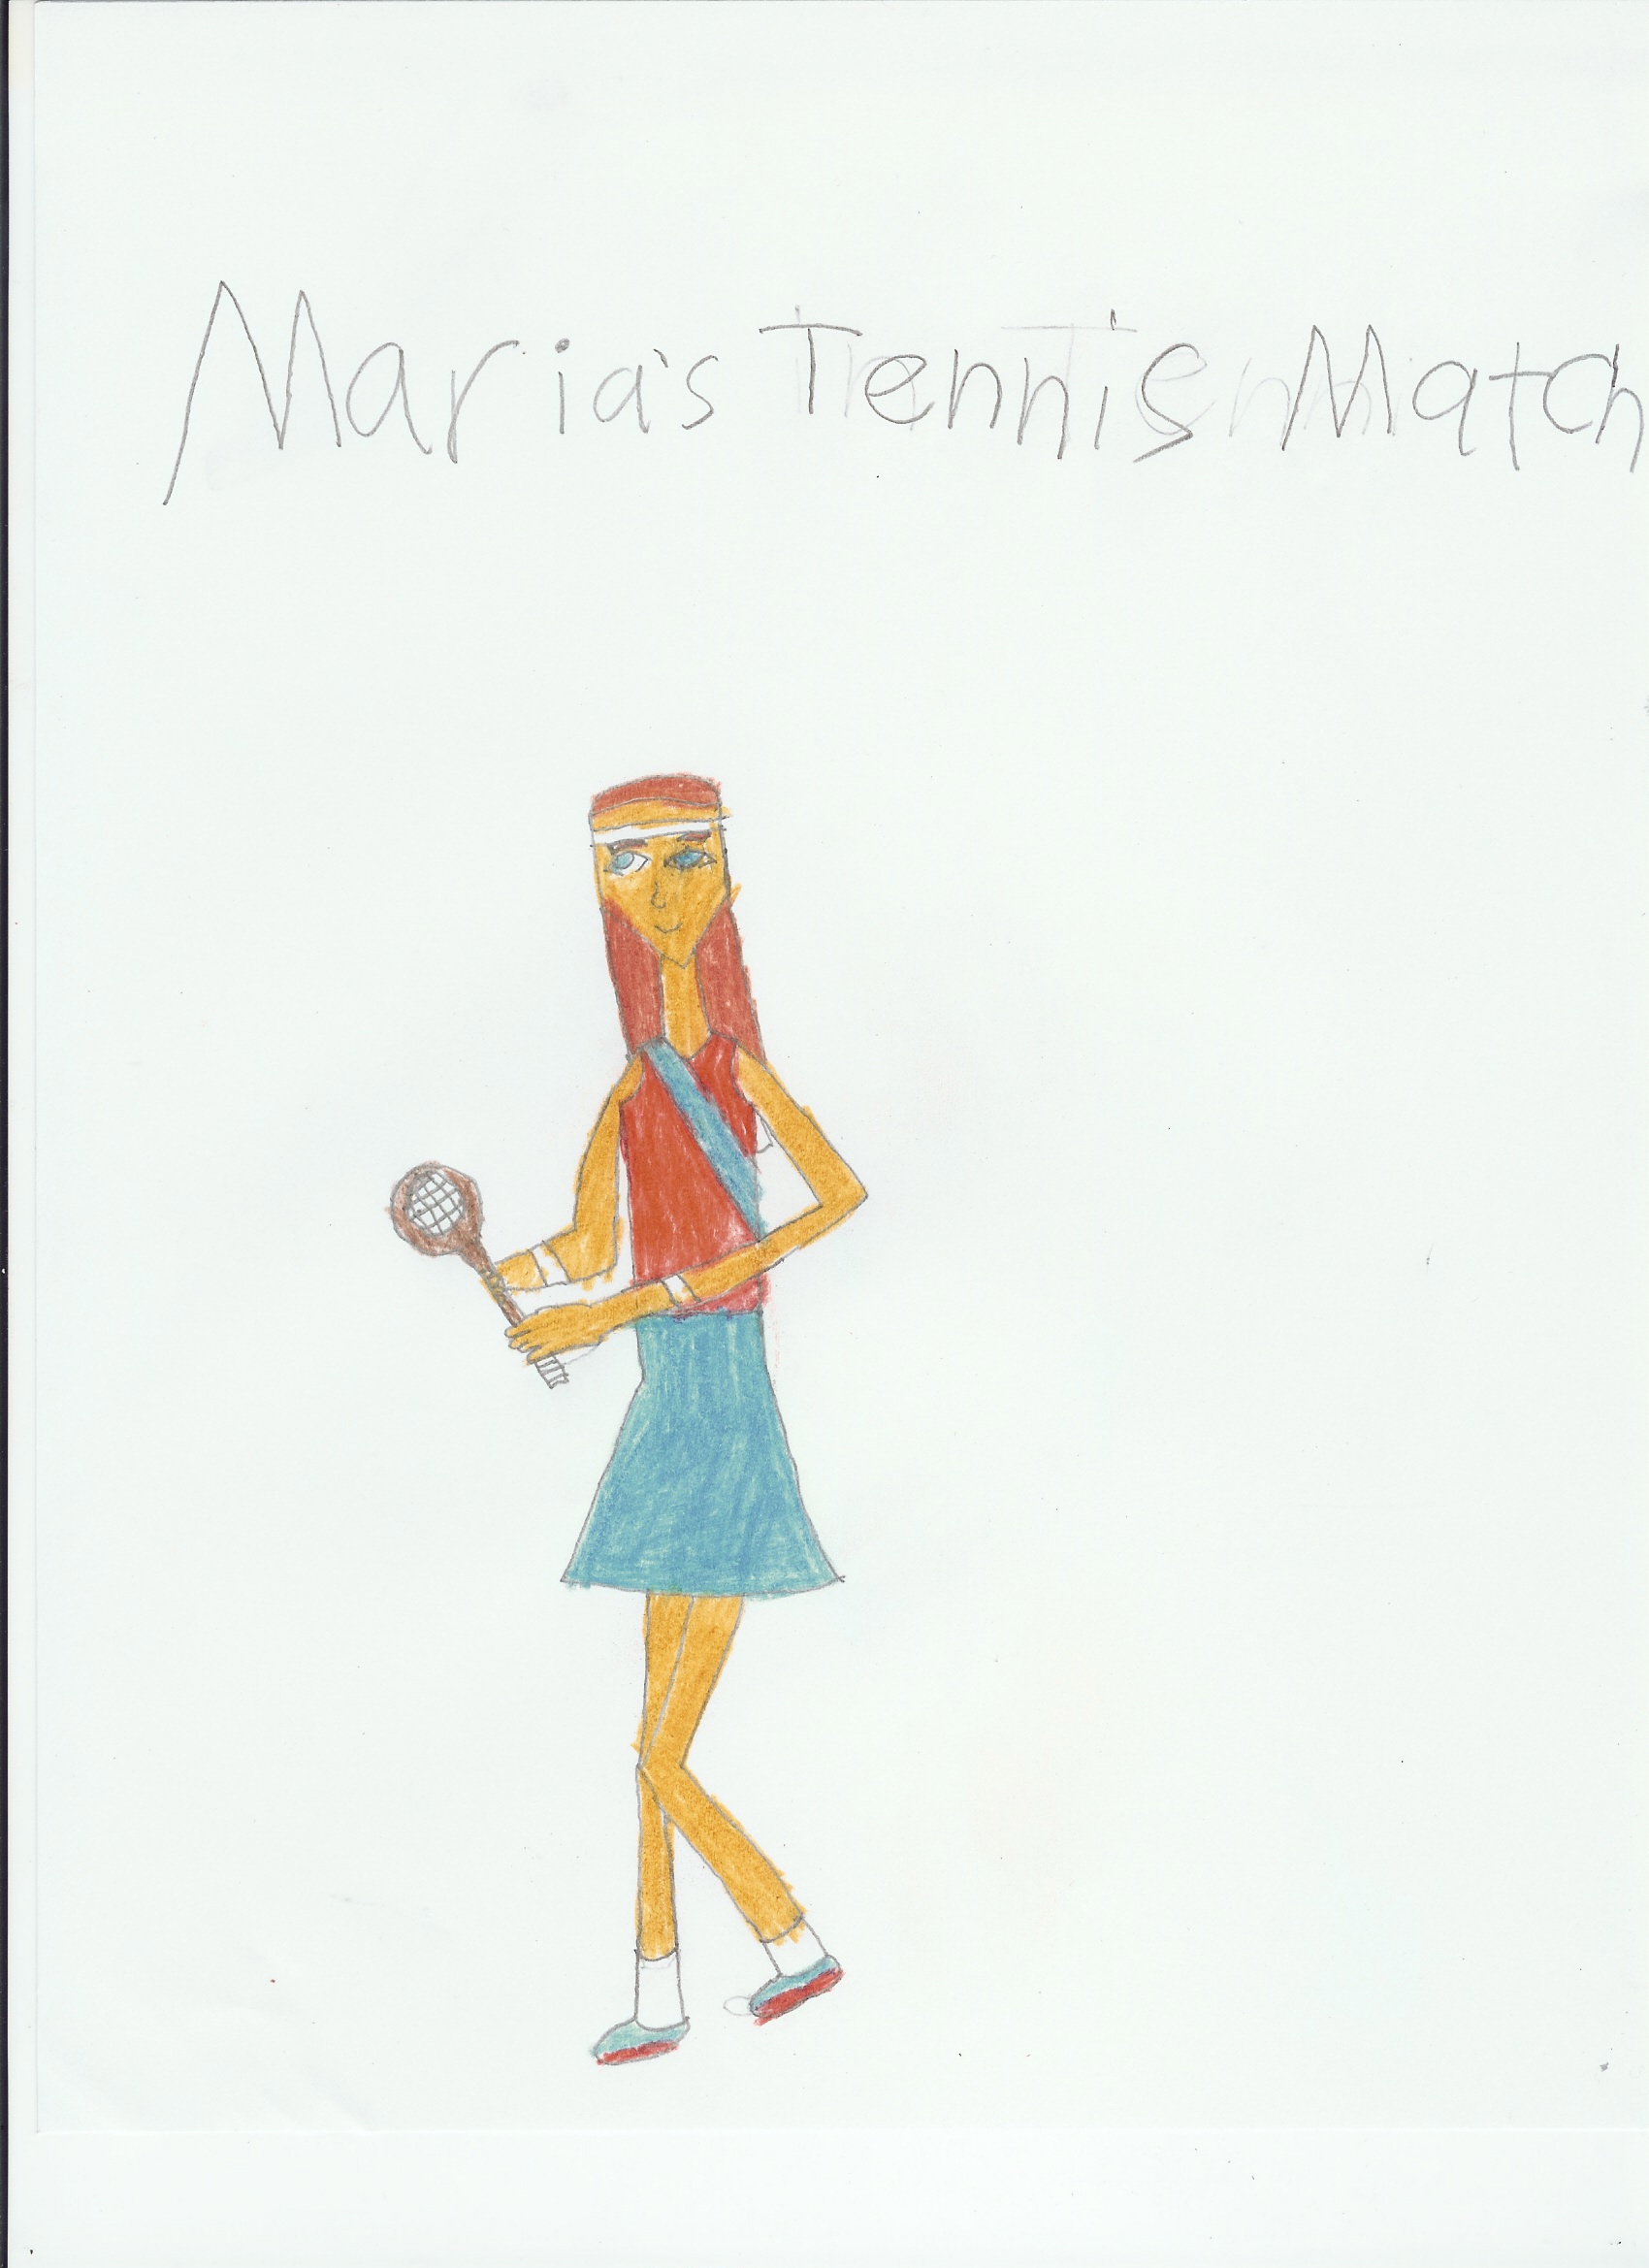 Maria's Tennis Match by tropicaldolphin51